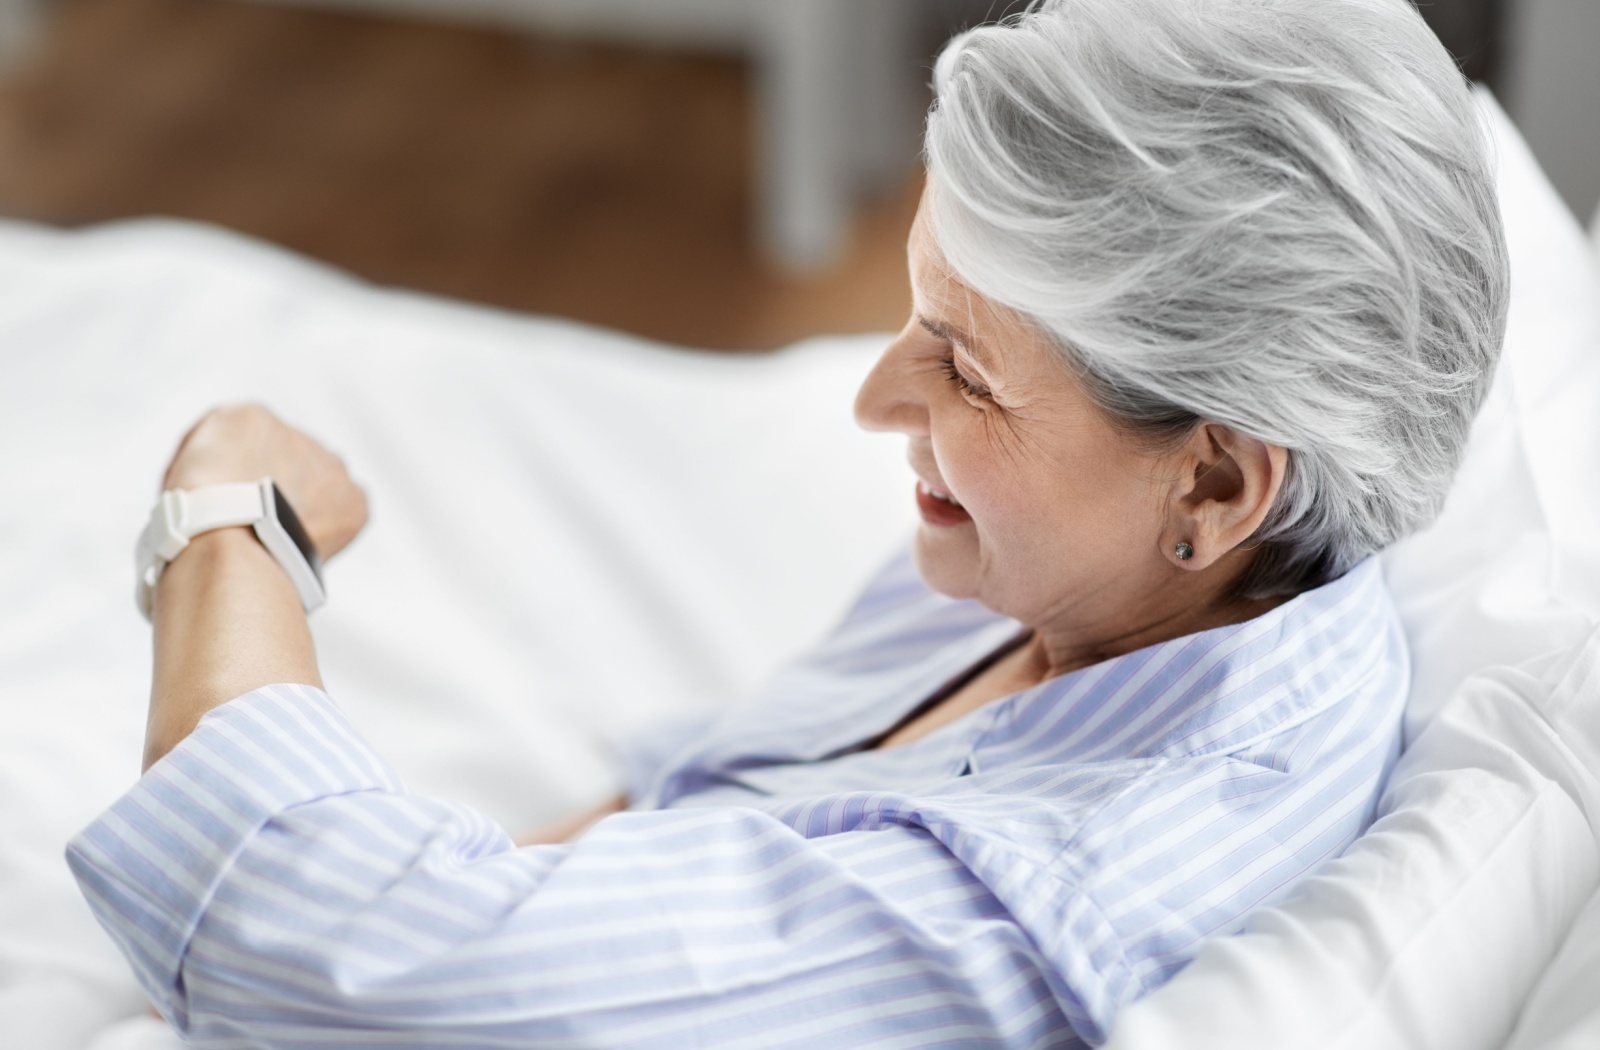 An older adult woman looking at her smartwatch to monitor her vitals.
